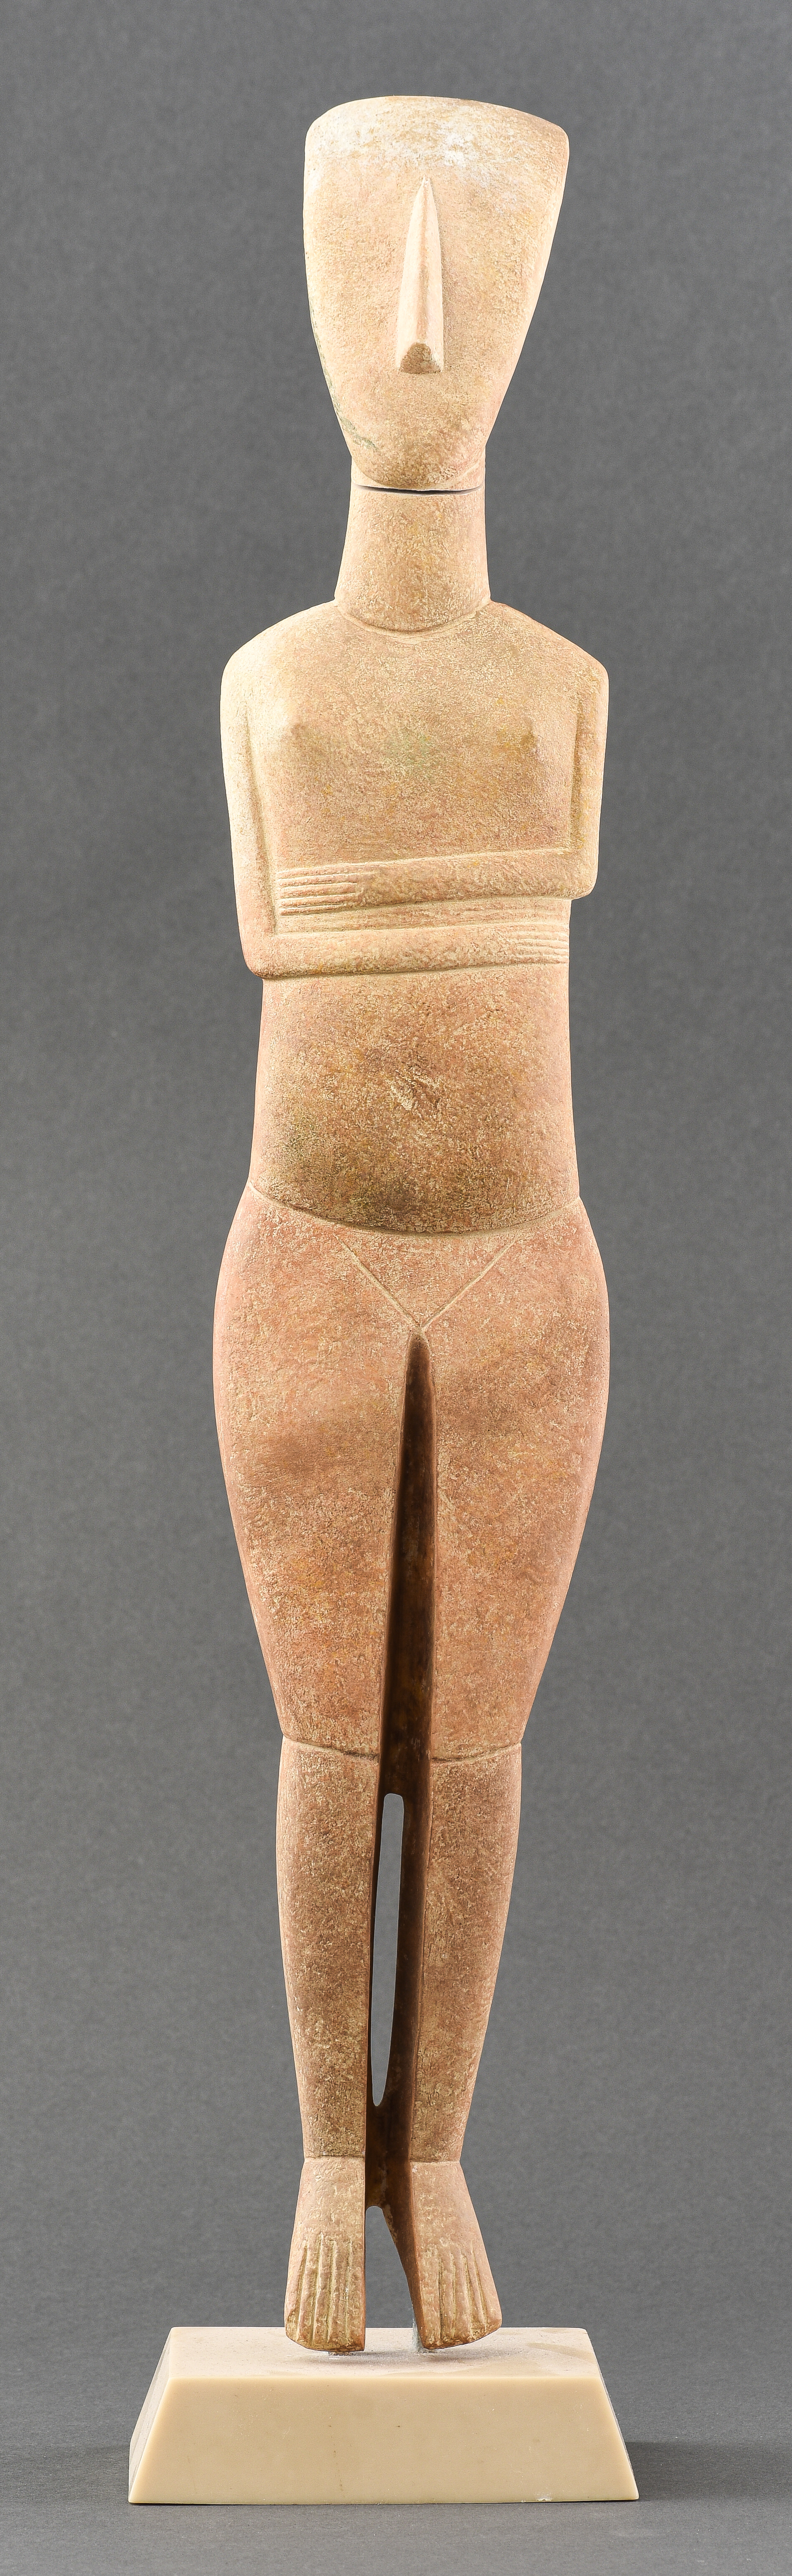 MMA CYCLADIC FIGURE AFTER THE BASTIS 3c51c1